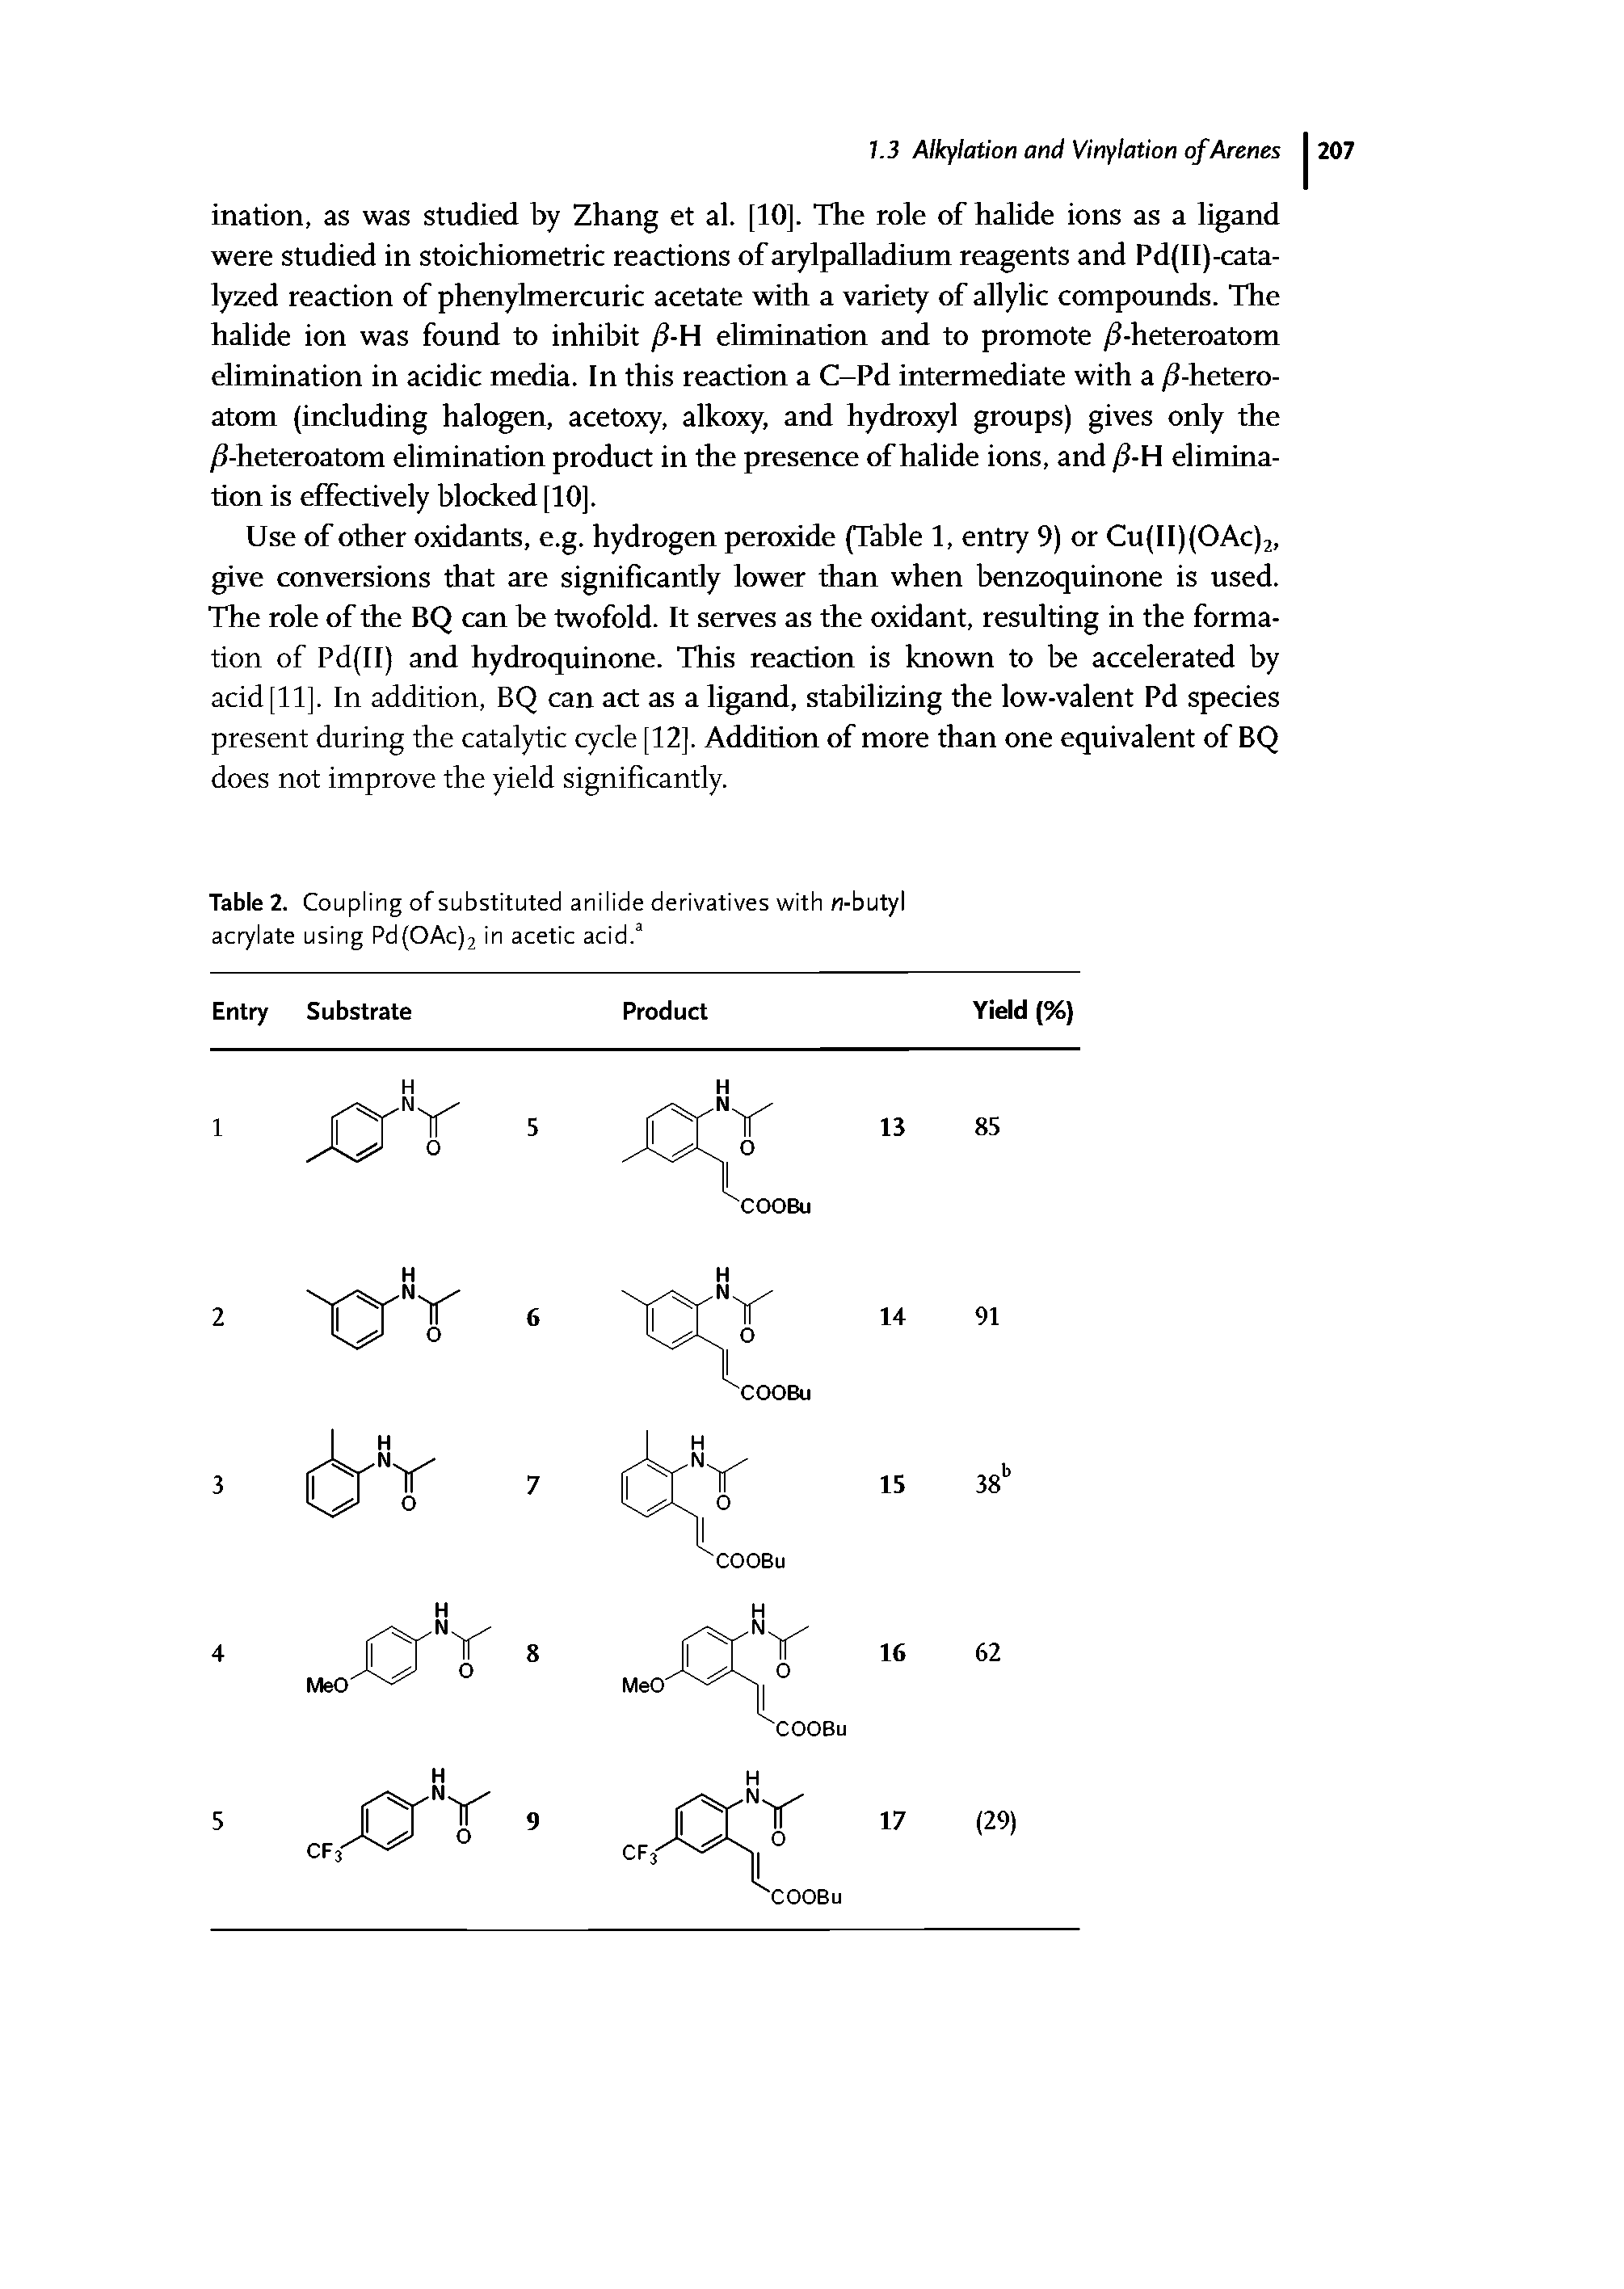 Table 2. Coupling of substituted anilide derivatives with n-butyl acrylate using Pd(OAc)2 in acetic acid.3...